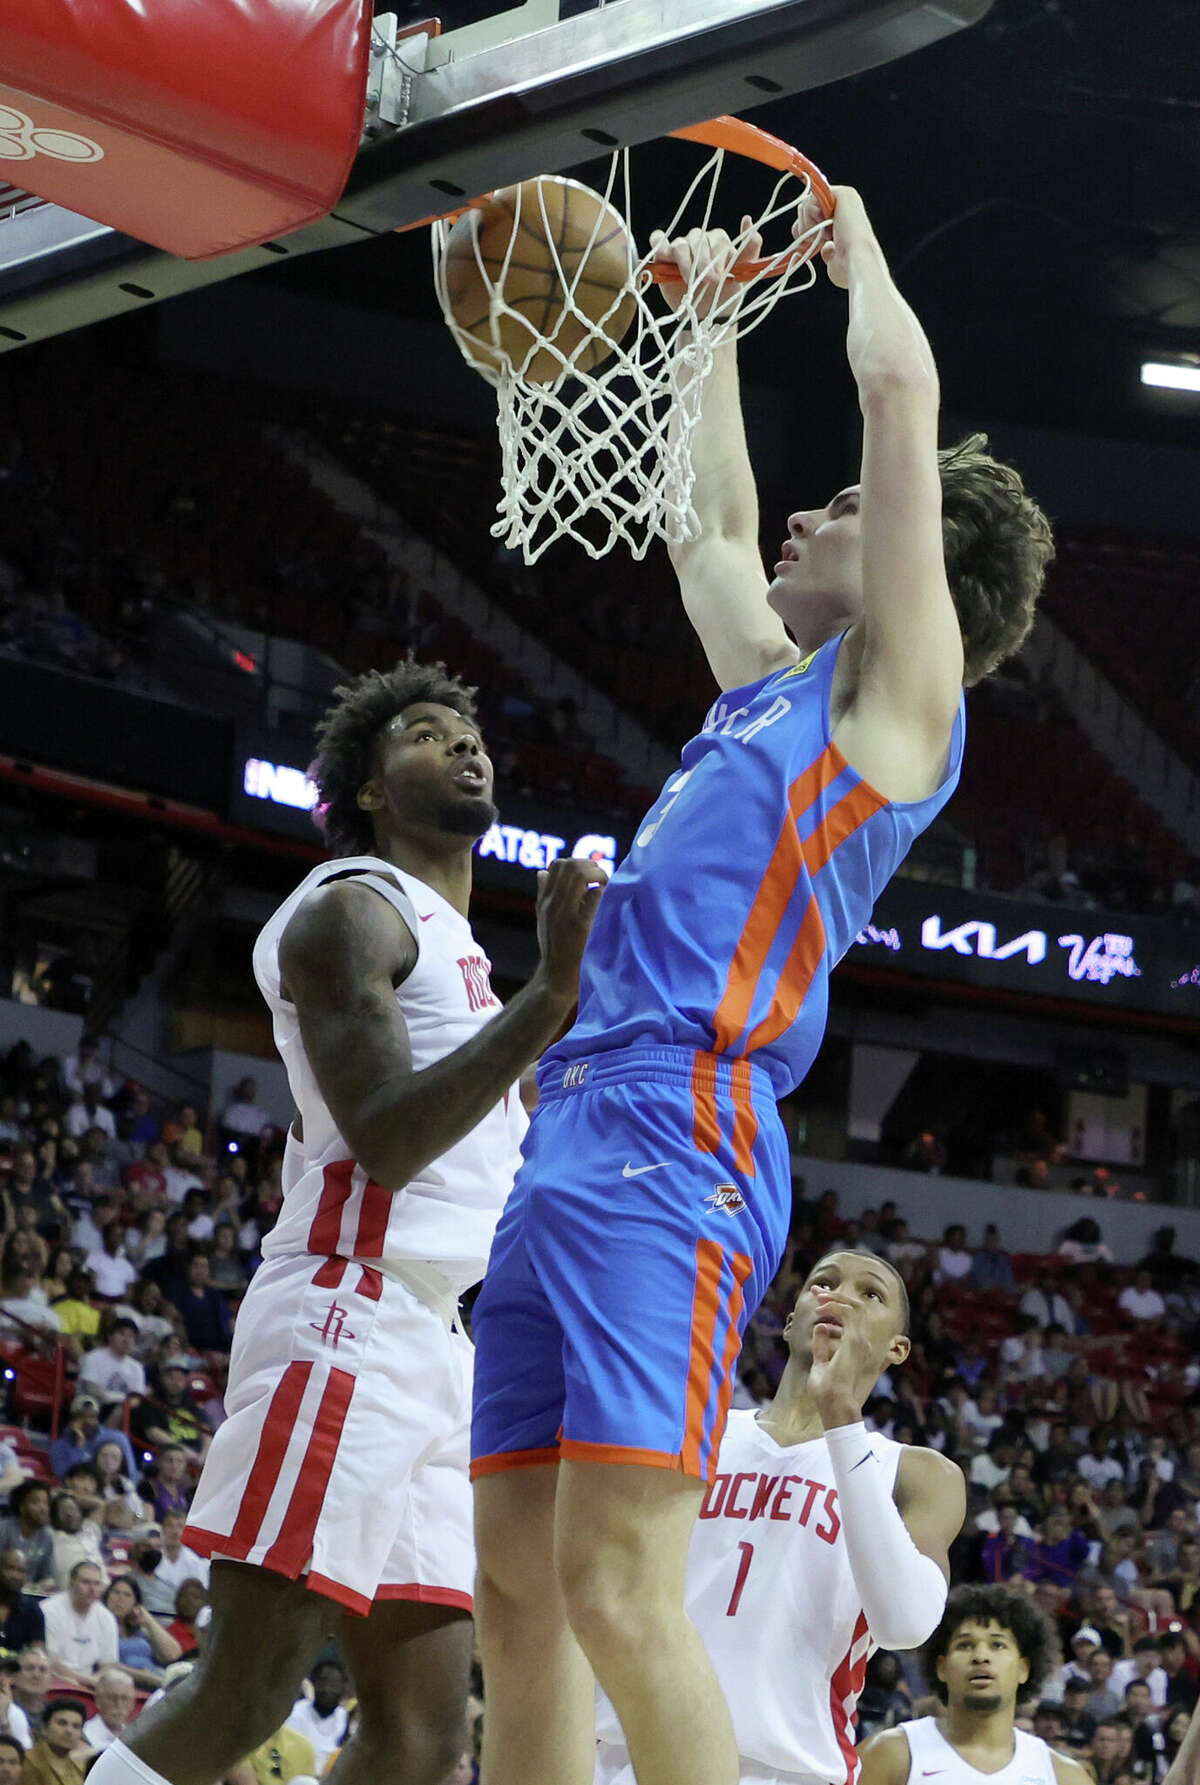 LAS VEGAS, NEVADA - JULY 09: Josh Giddey #3 of the Oklahoma City Thunder dunks against Tari Eason #17 of the Houston Rockets during the 2022 NBA Summer League at the Thomas & Mack Center on July 09, 2022 in Las Vegas, Nevada. NOTE TO USER: User expressly acknowledges and agrees that, by downloading and or using this photograph, User is consenting to the terms and conditions of the Getty Images License Agreement. (Photo by Ethan Miller/Getty Images)